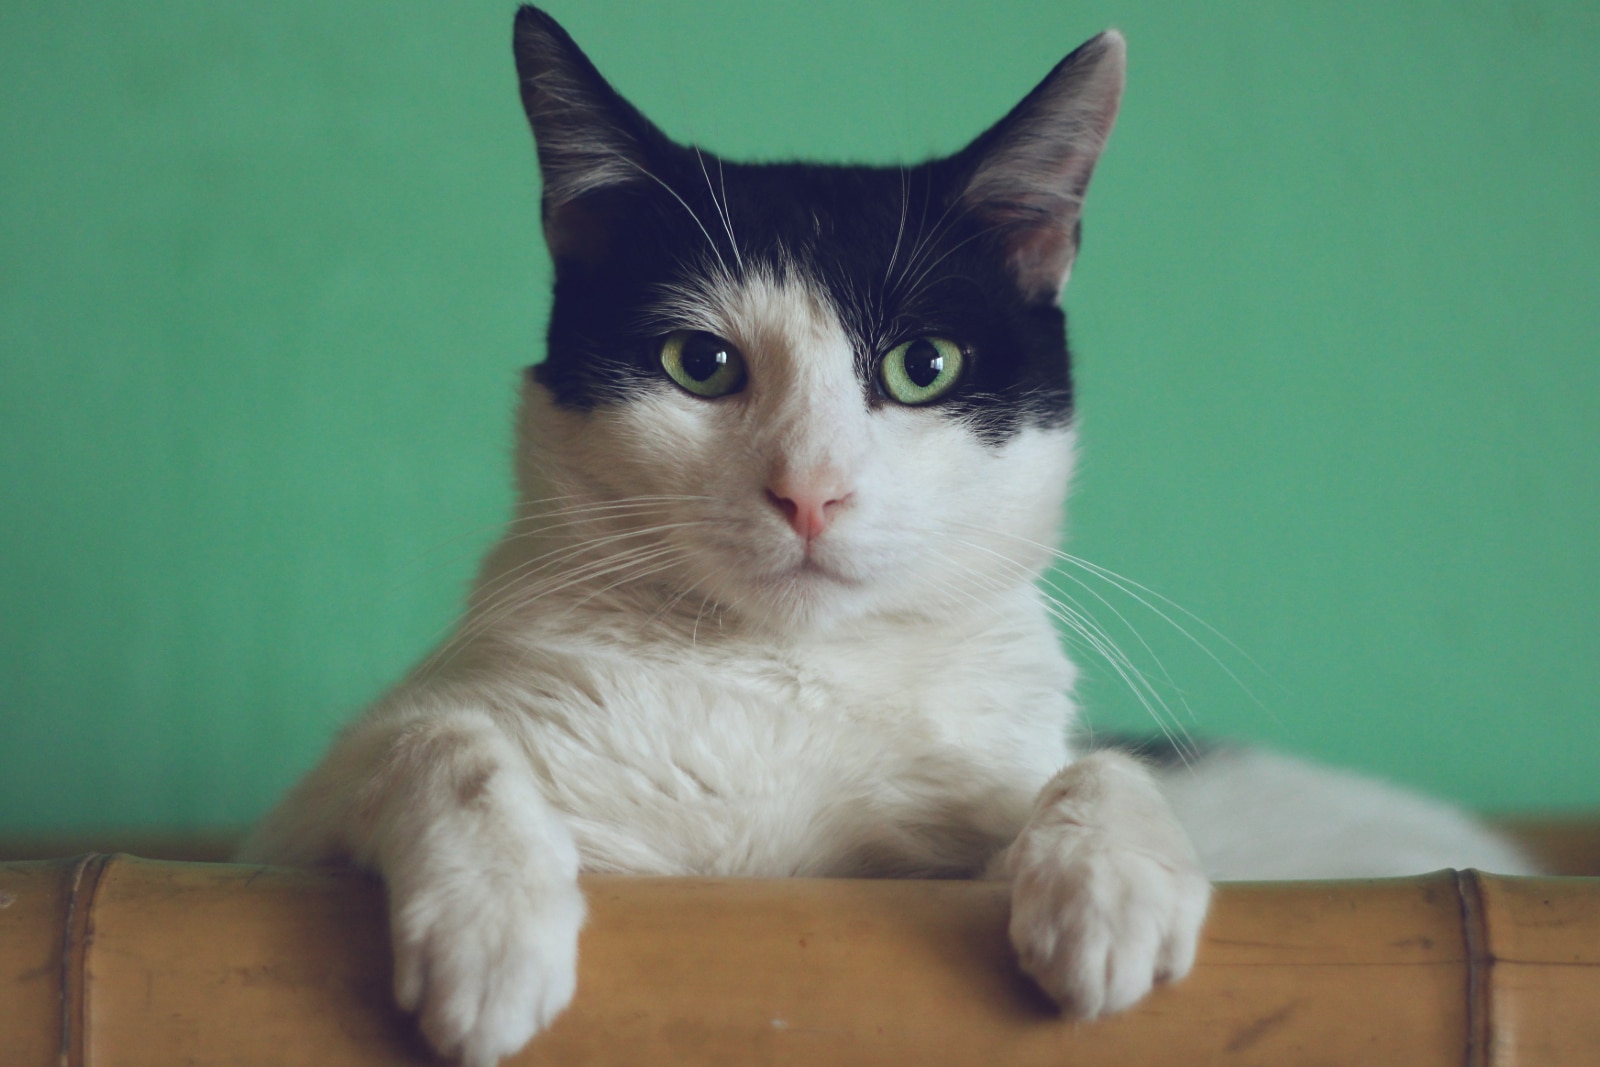 Cat looking at the camera in front of a green background